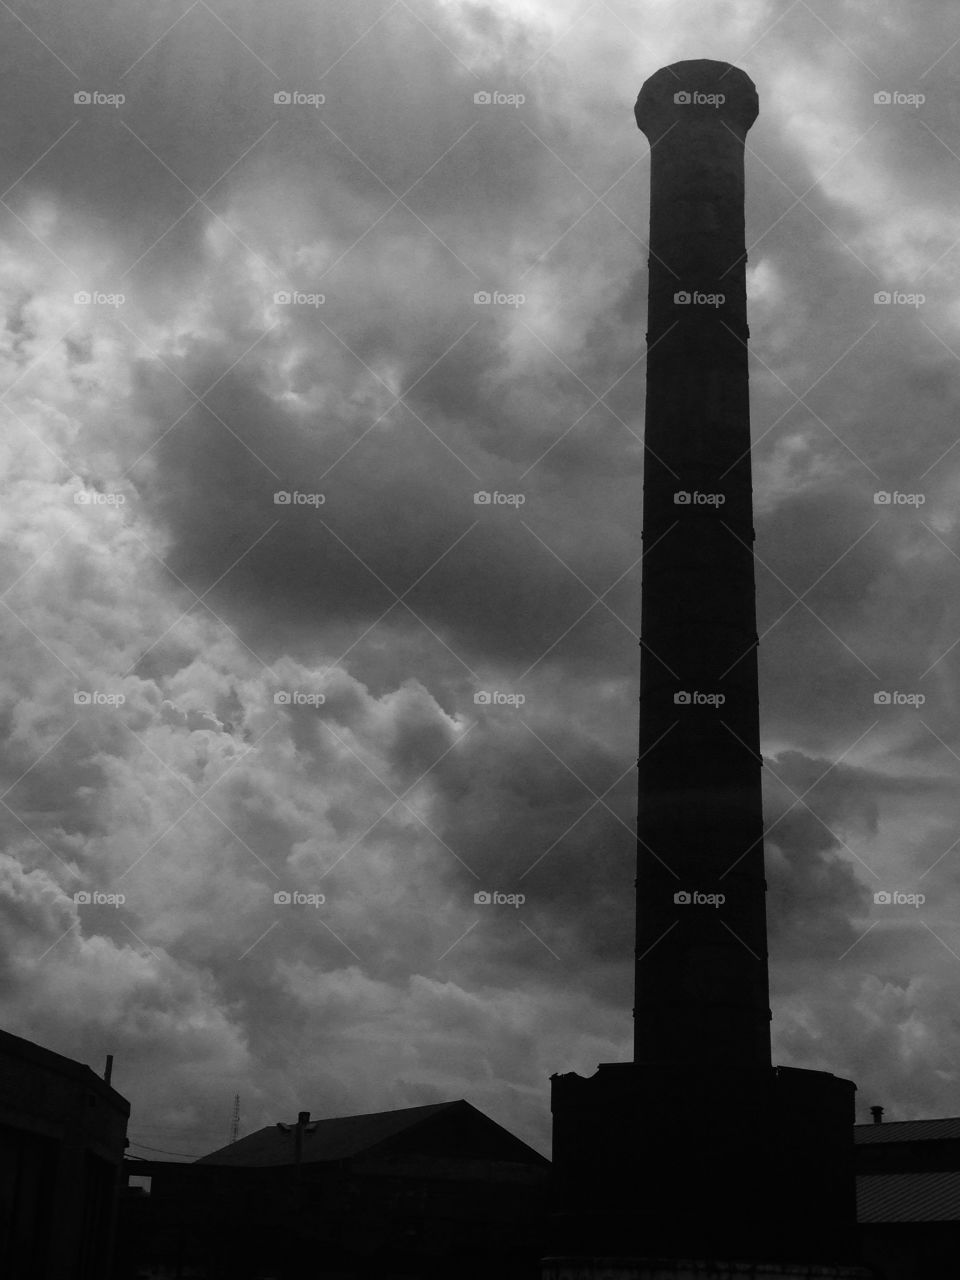 Smokestack and storm clouds